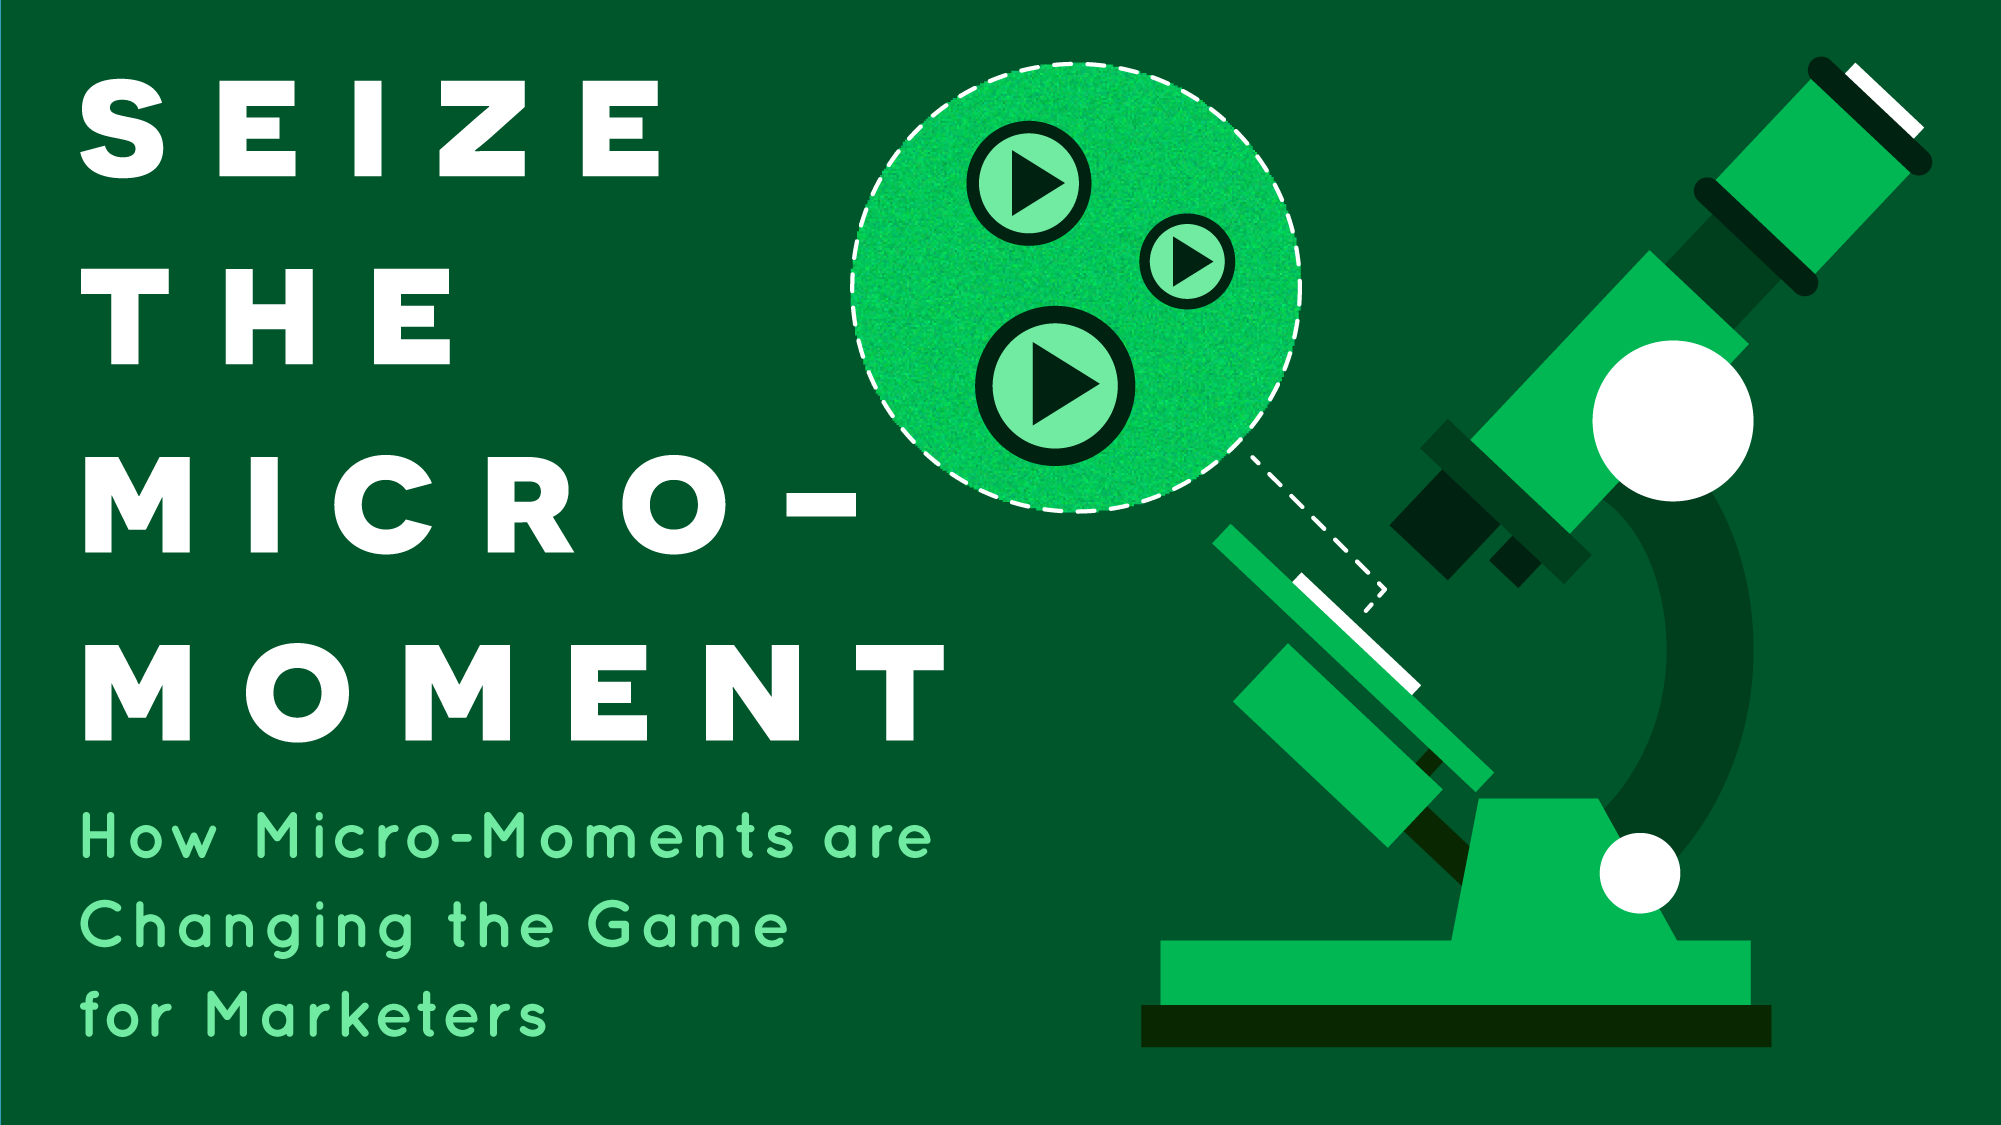 How Micro-Moments are Changing the Game for Marketers